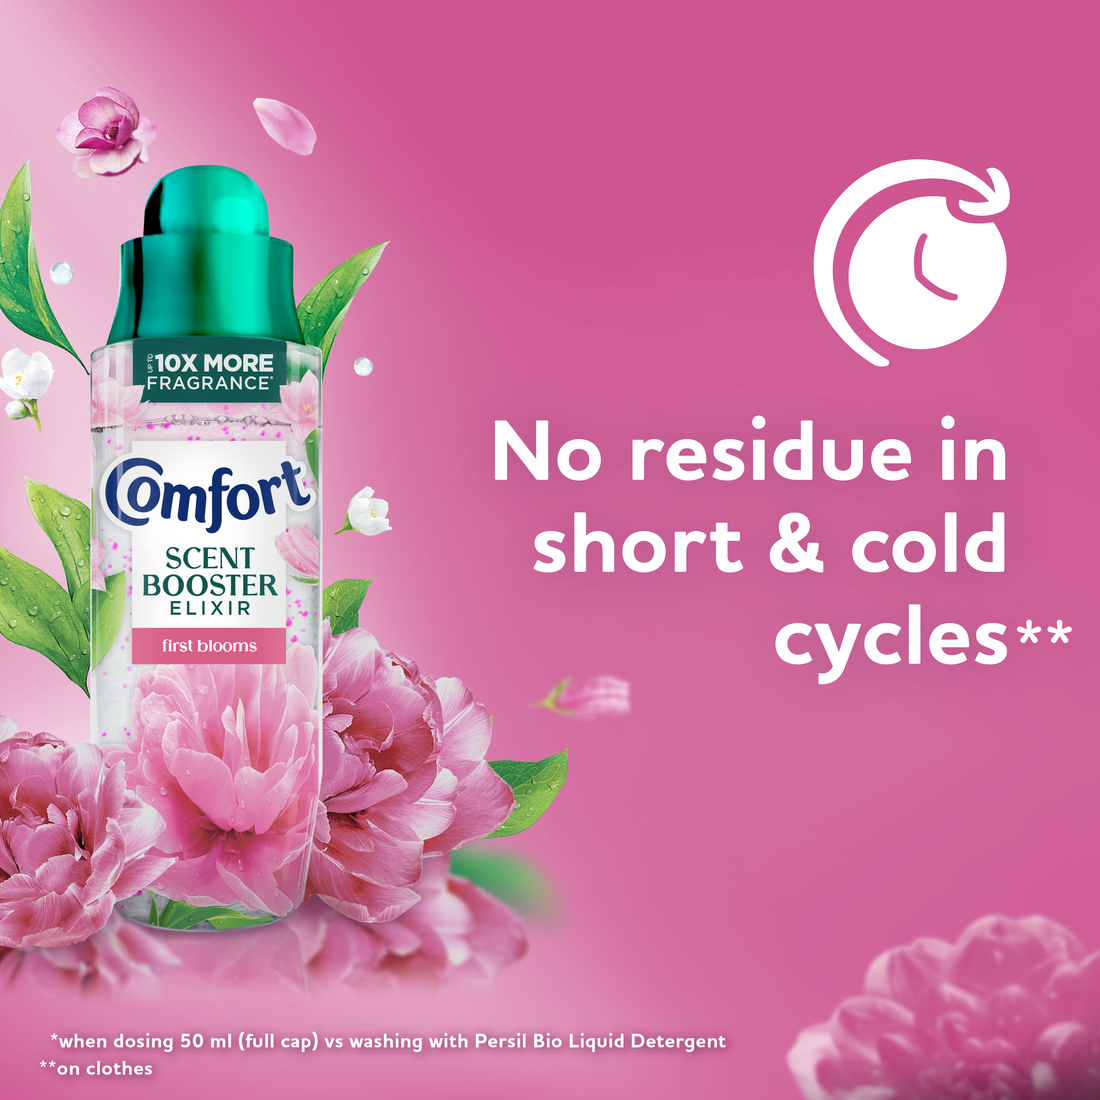 No residue in short and cold cycles

*when dosing 50ml (full cap) vs washing with Persil Bio Liquid Detergent
**on clothes